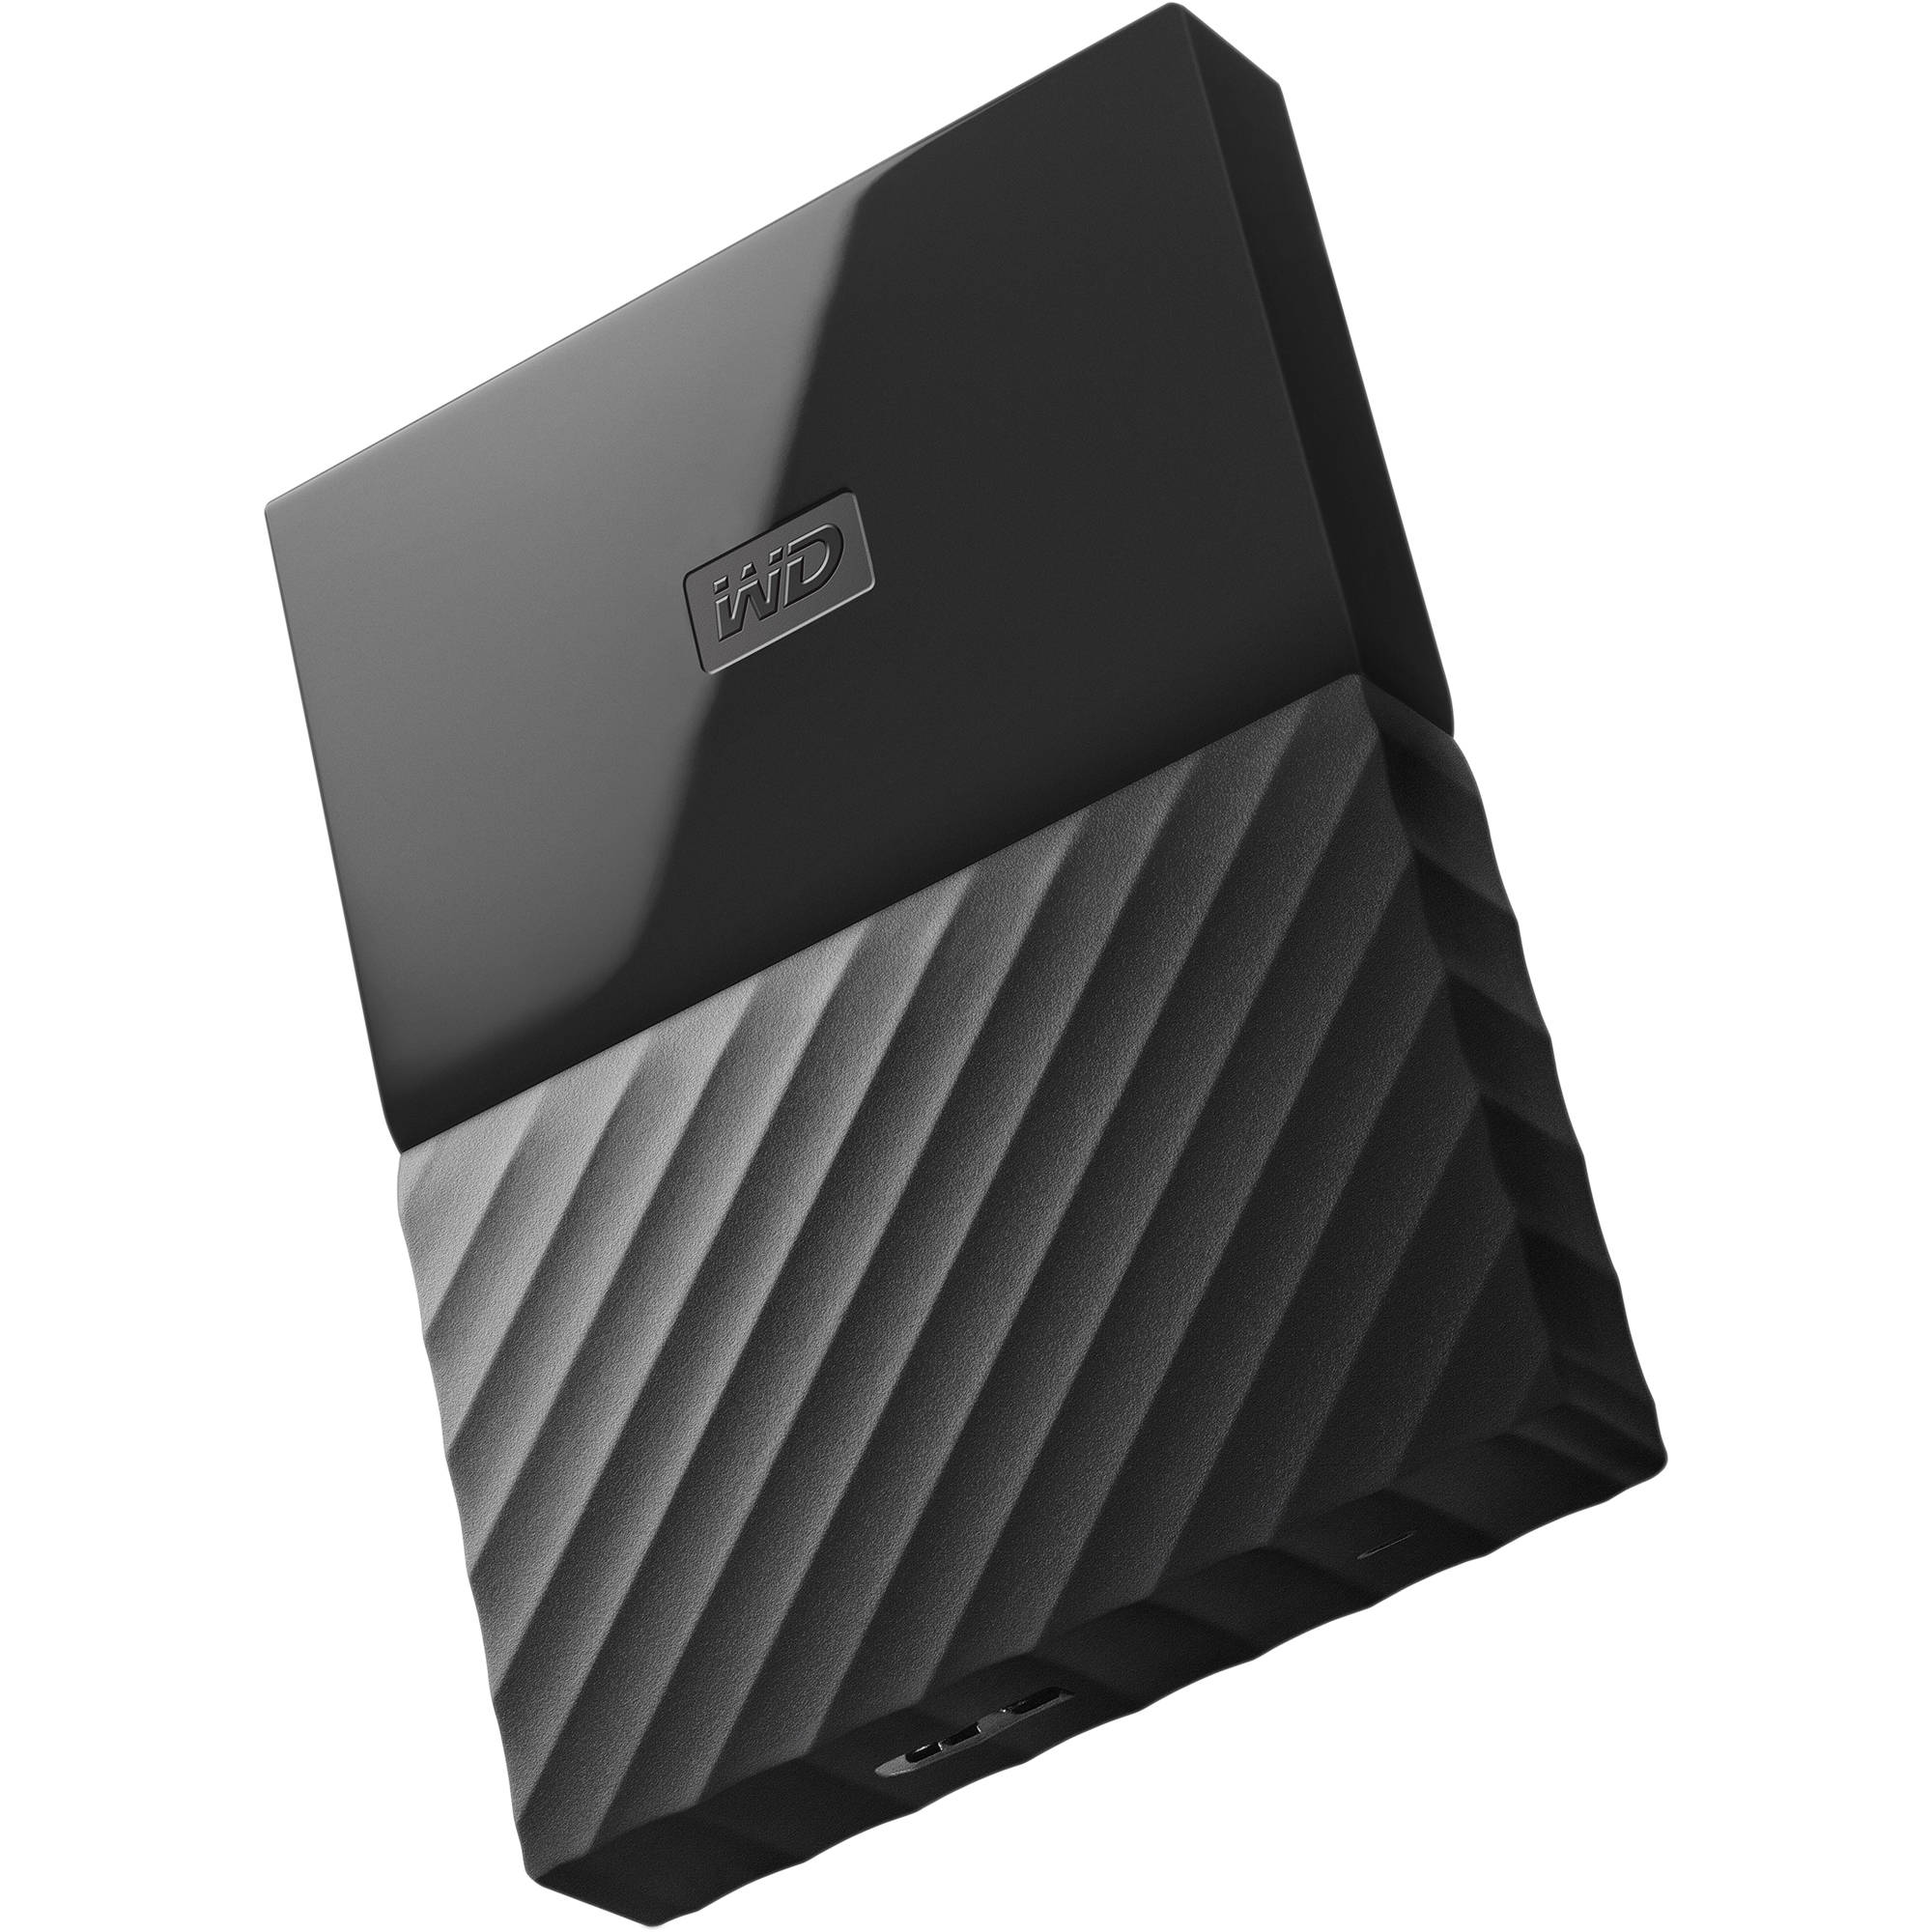 format a wd hard drive duo for mac